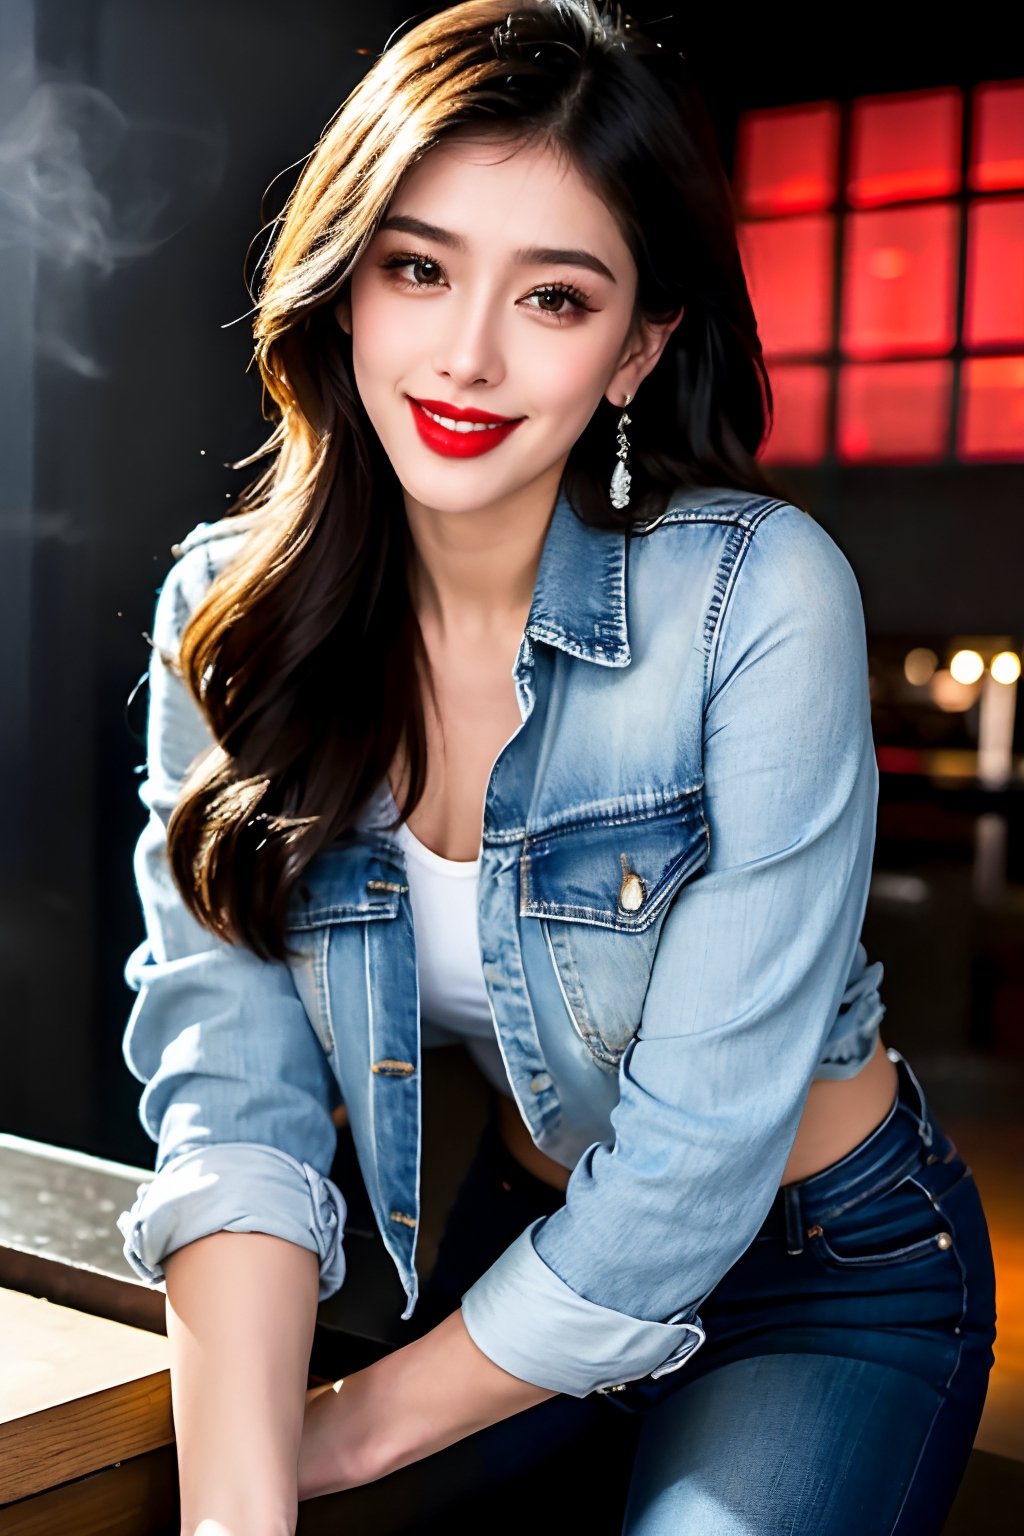 beautiful detailed eyes, tight jeans, cropped denim jacket, make-up, red lips, smiling, posing sexy in a night club and smoking a cigarette, realistic,blackbootsnjeans,cute girl